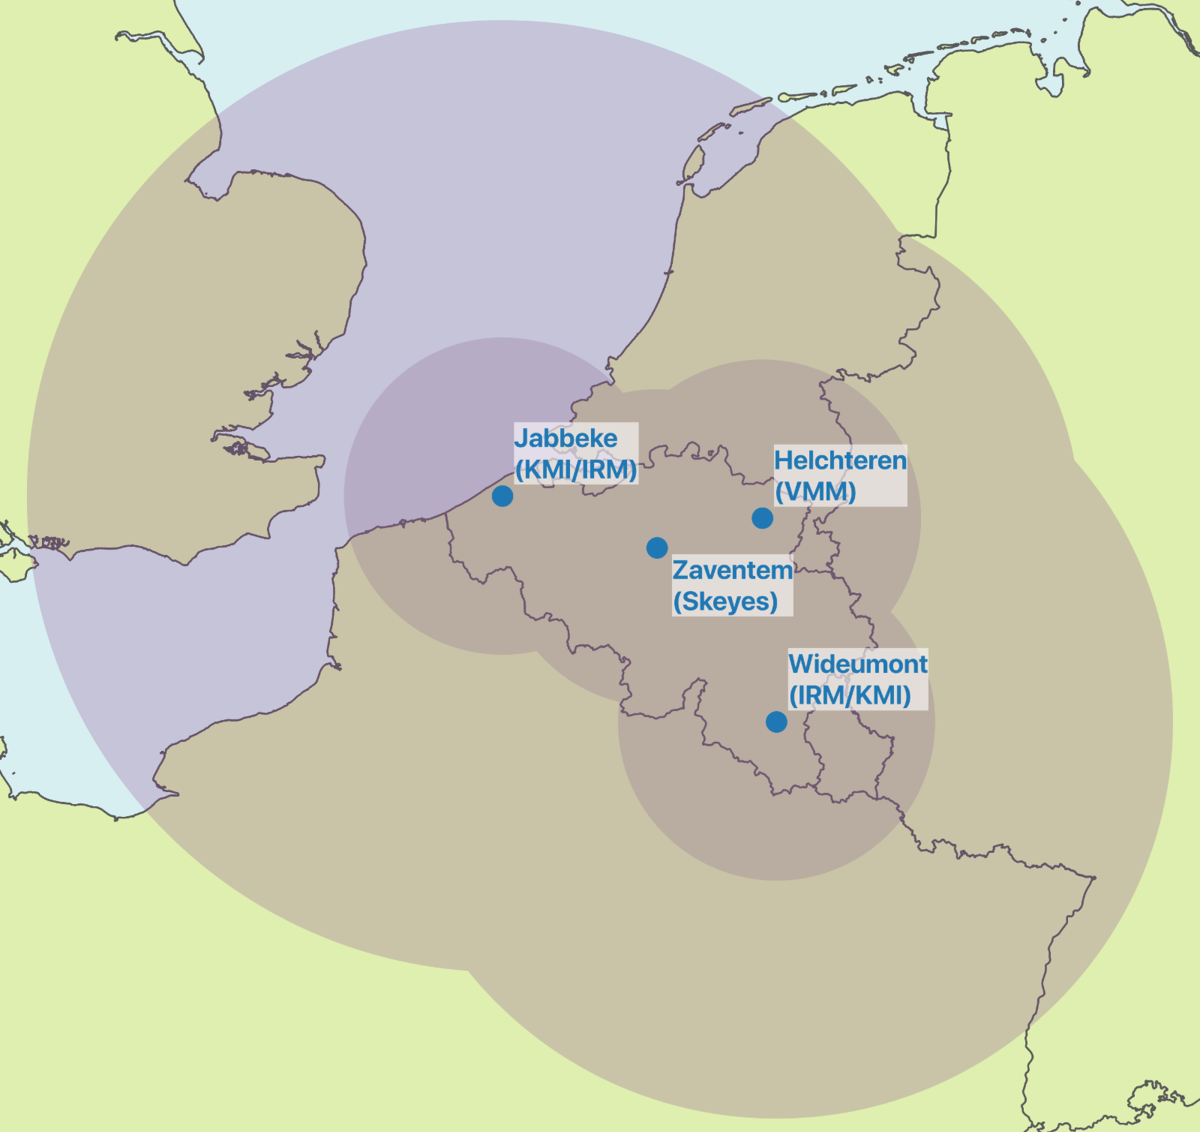 The Belgian network of the meteorological radars. Around every radar is a circle of around 100 km, this is the range within a radar can carry out quantitative precipitation estimates. The larger area represents the full range.